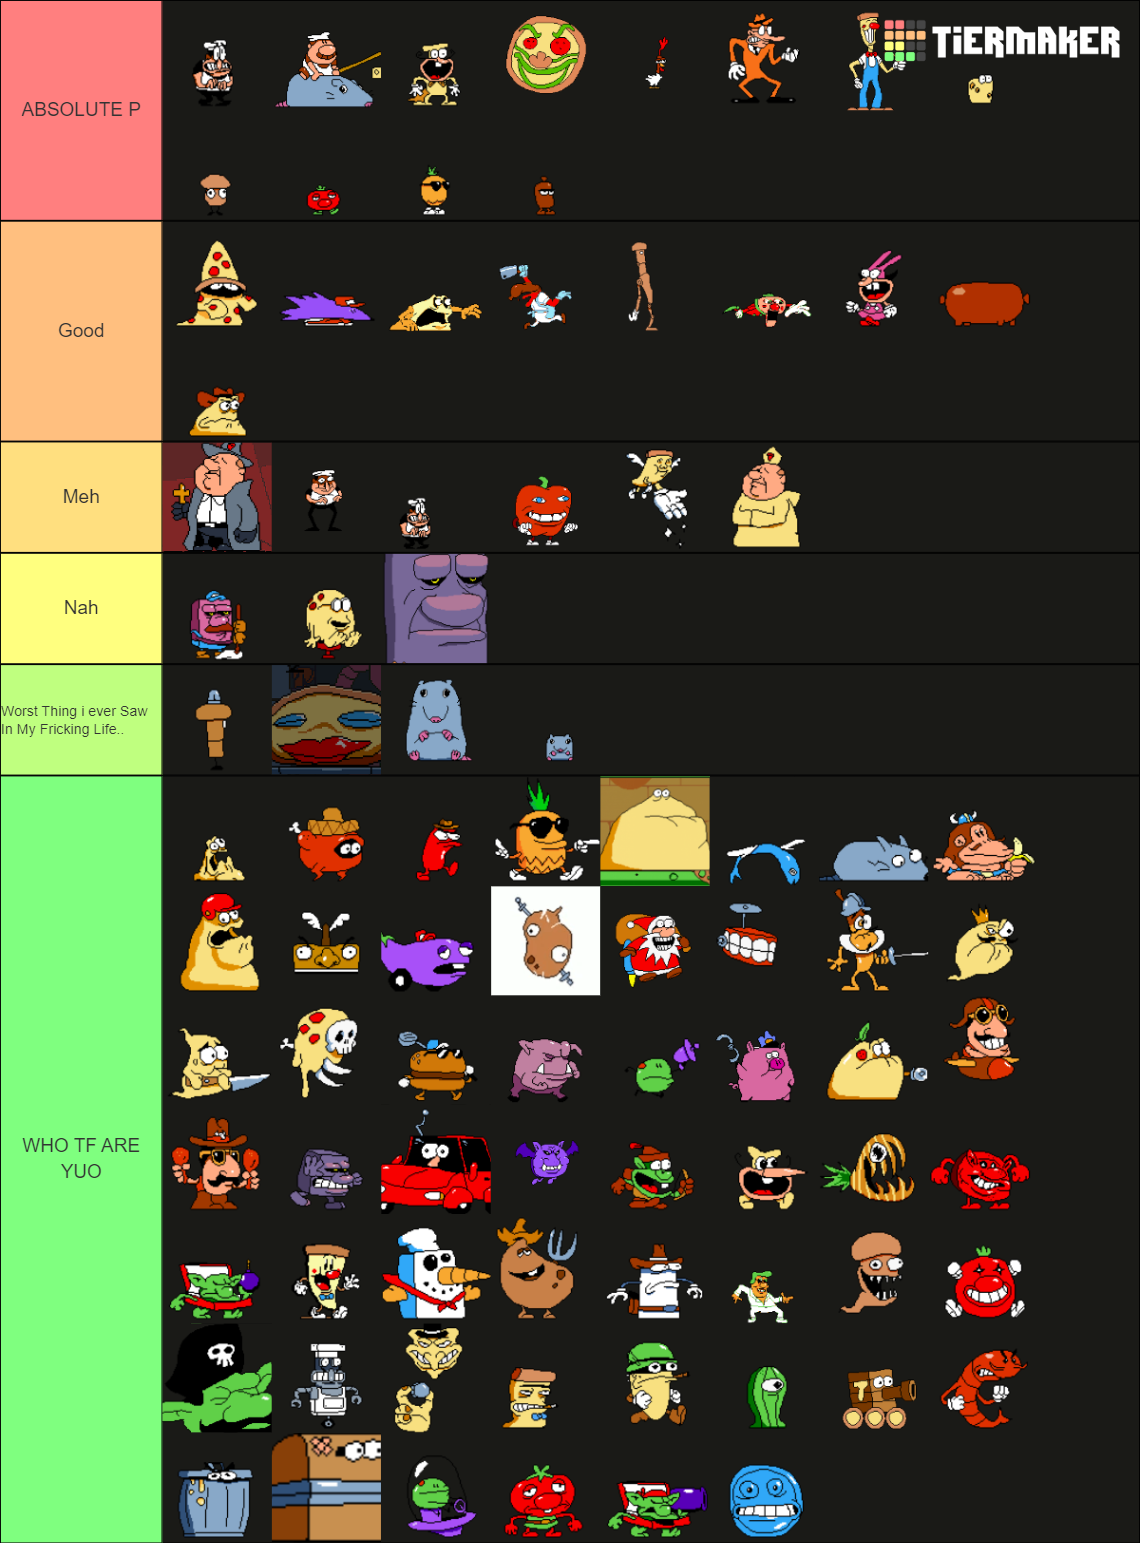 Create a Pizza Tower Characters [SPOILERS] Tier List - TierMaker